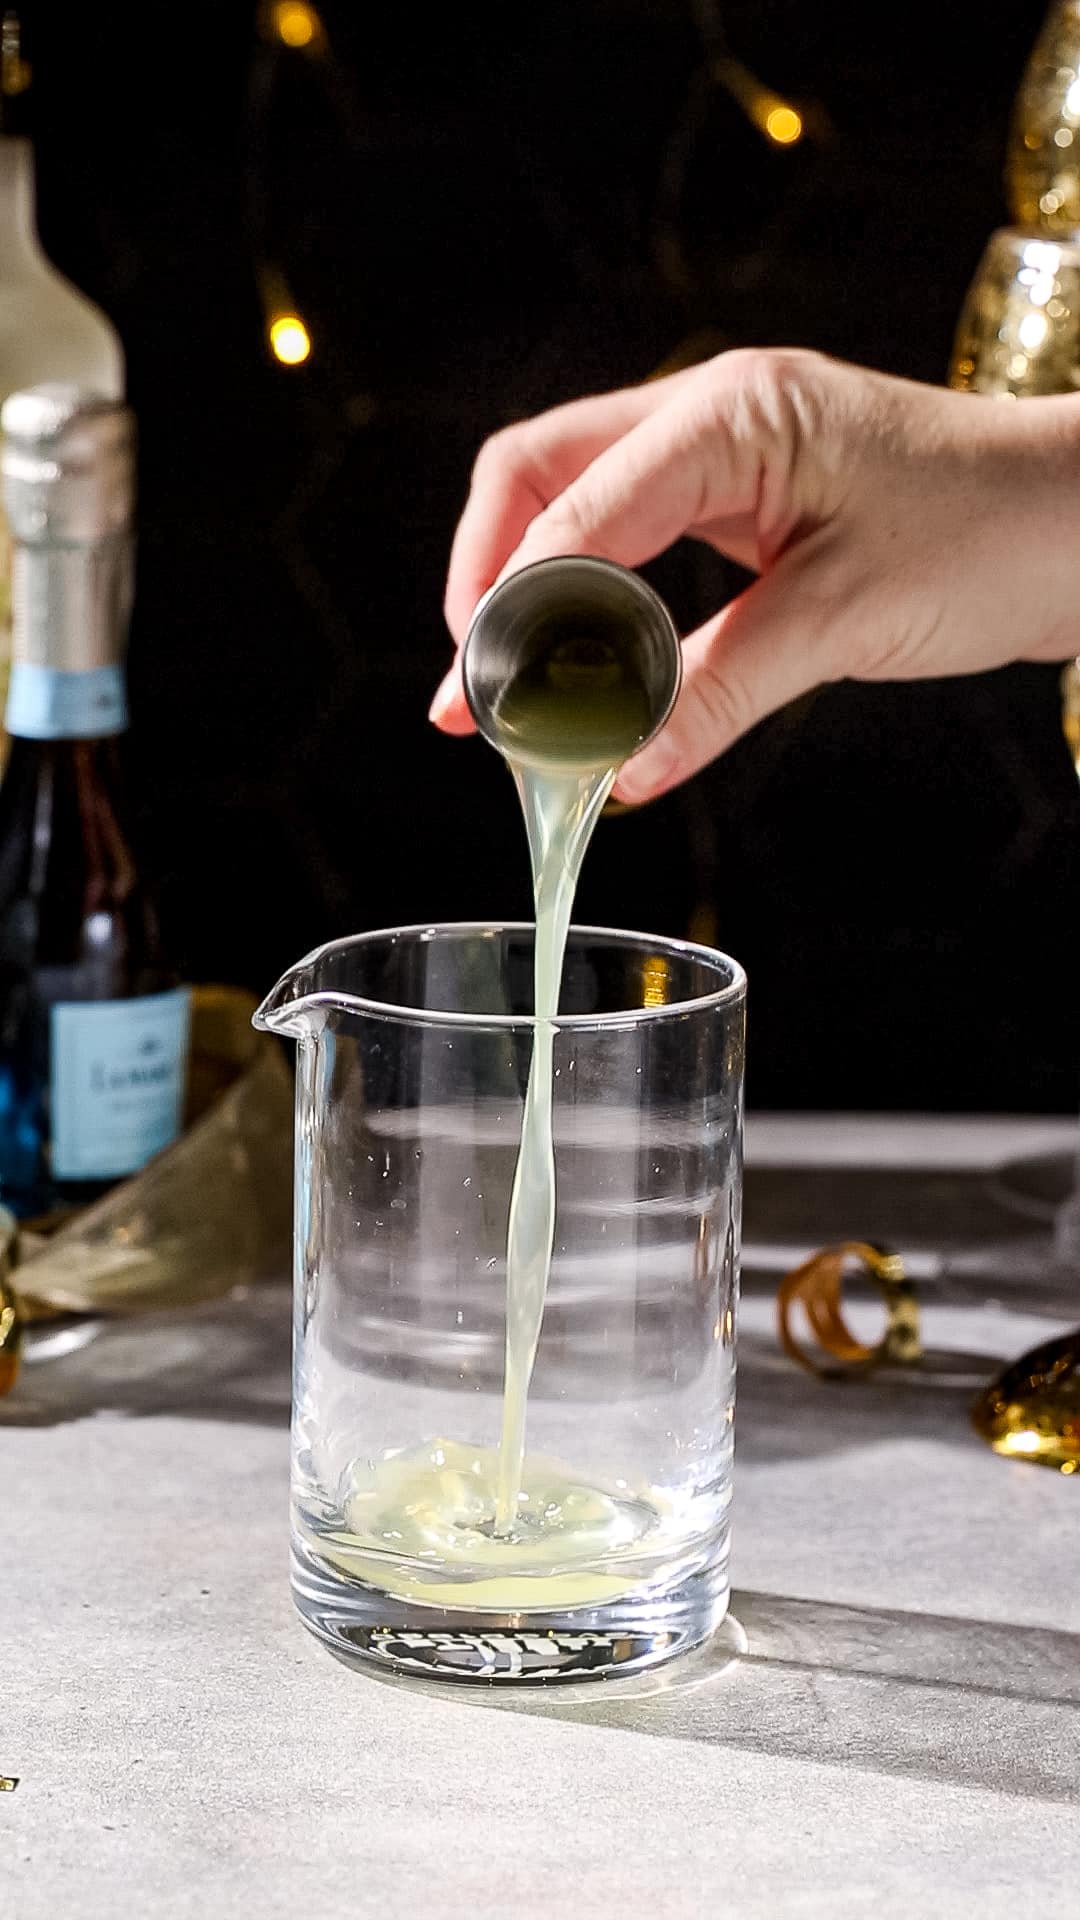 Hand pouring limoncello liqueur from a cocktail jigger into a mixing glass.